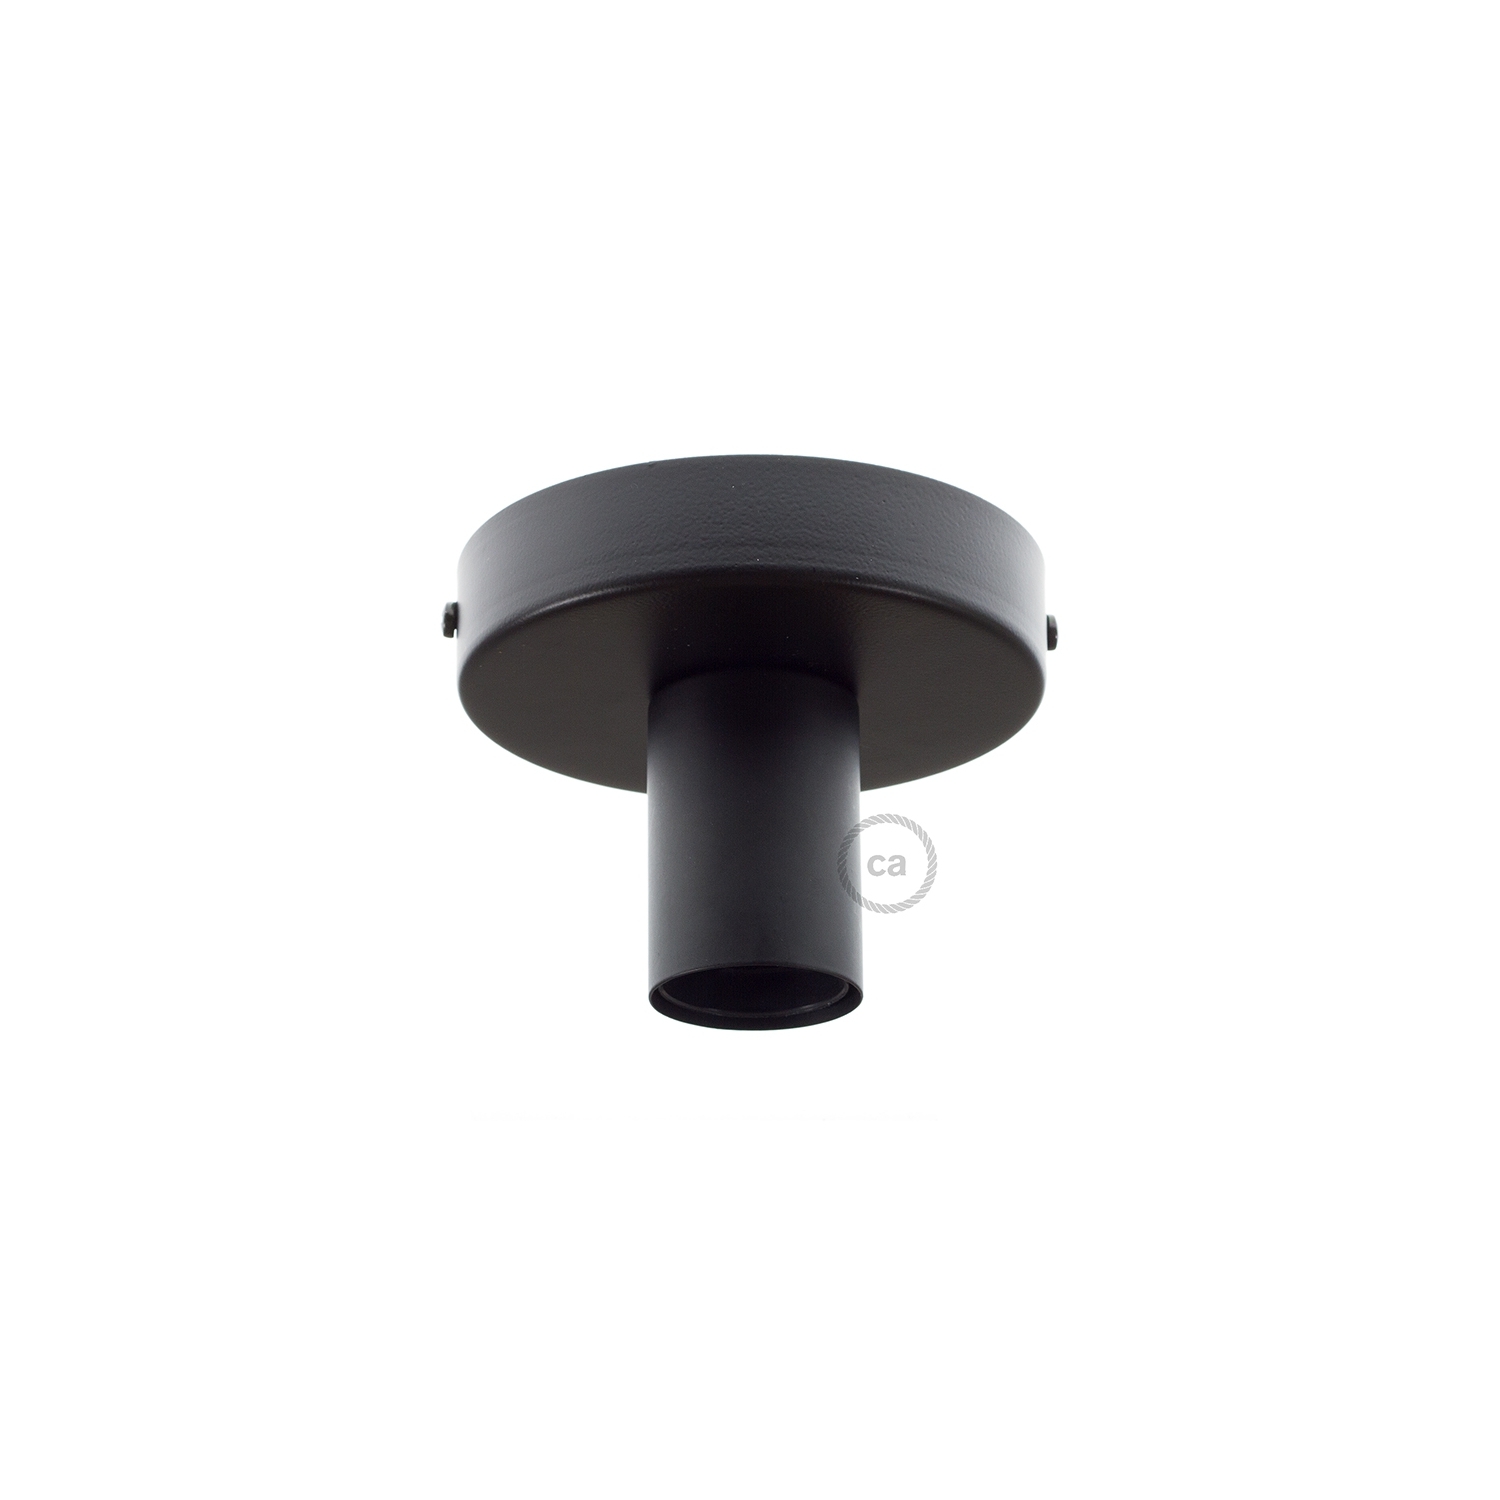 Fermaluce, the black metal wall or ceiling light source.